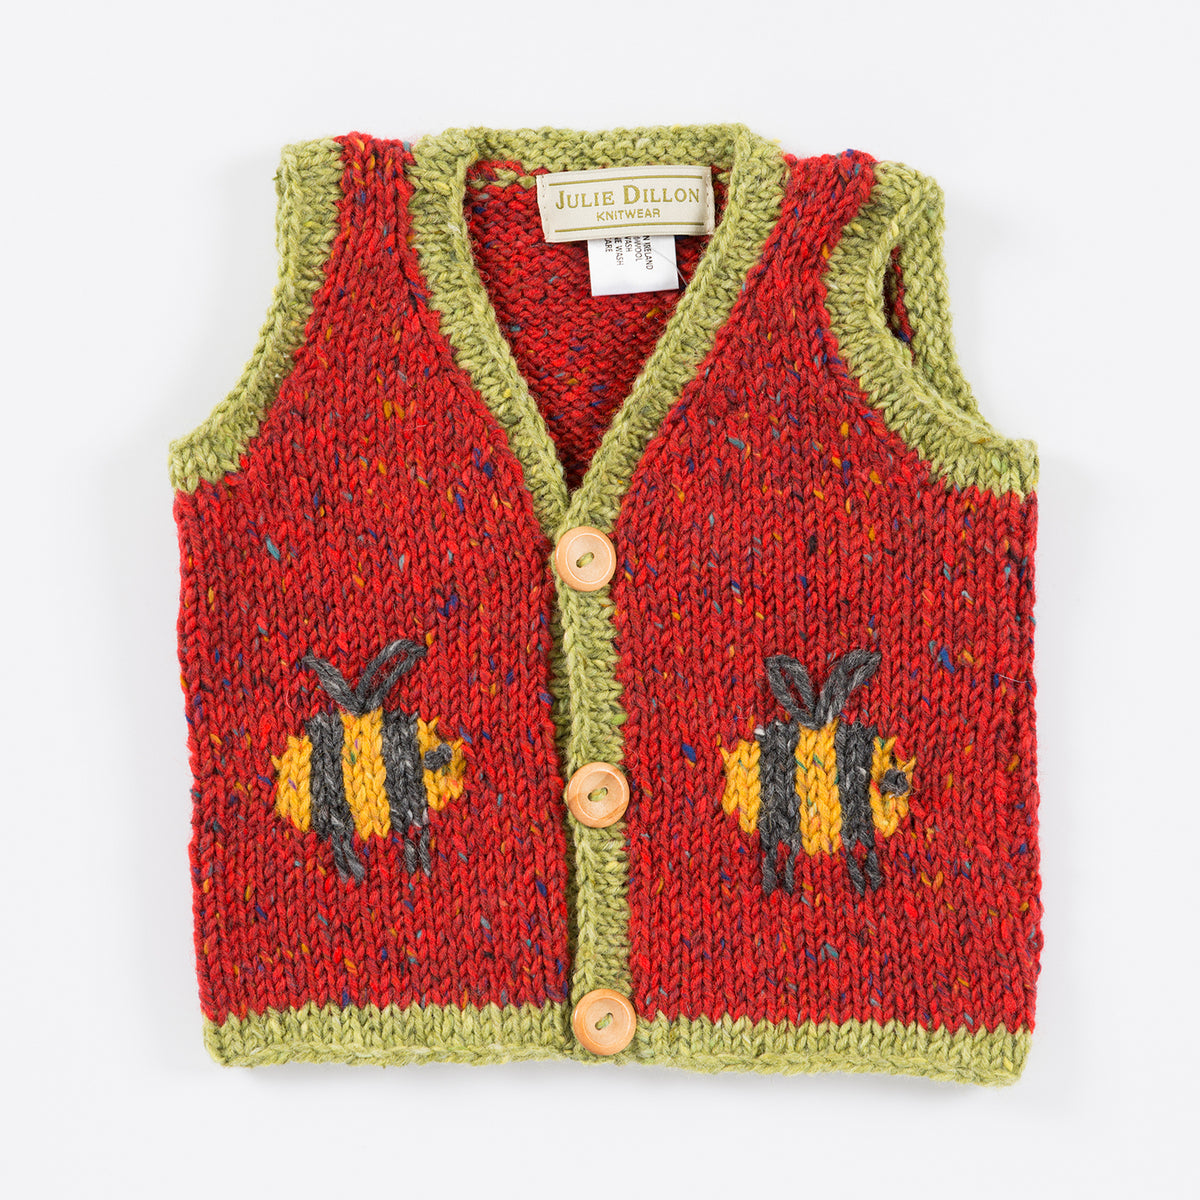 Handknitted Baby Waistcoat - Red with Bumble Bee motif